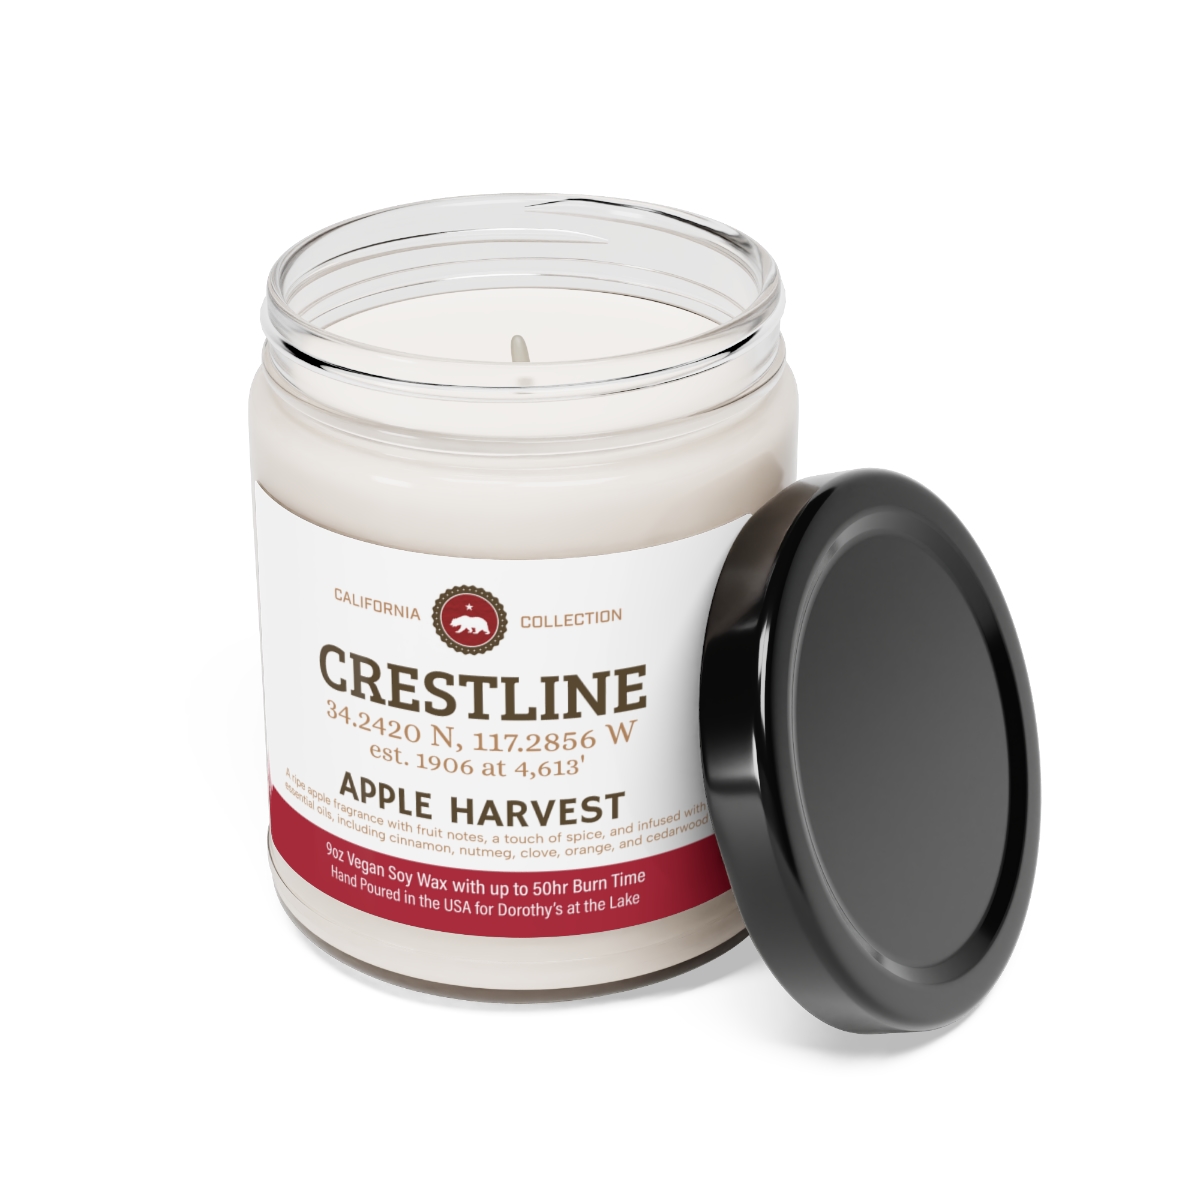 crestline, ca 9 oz soy candle from our california collection